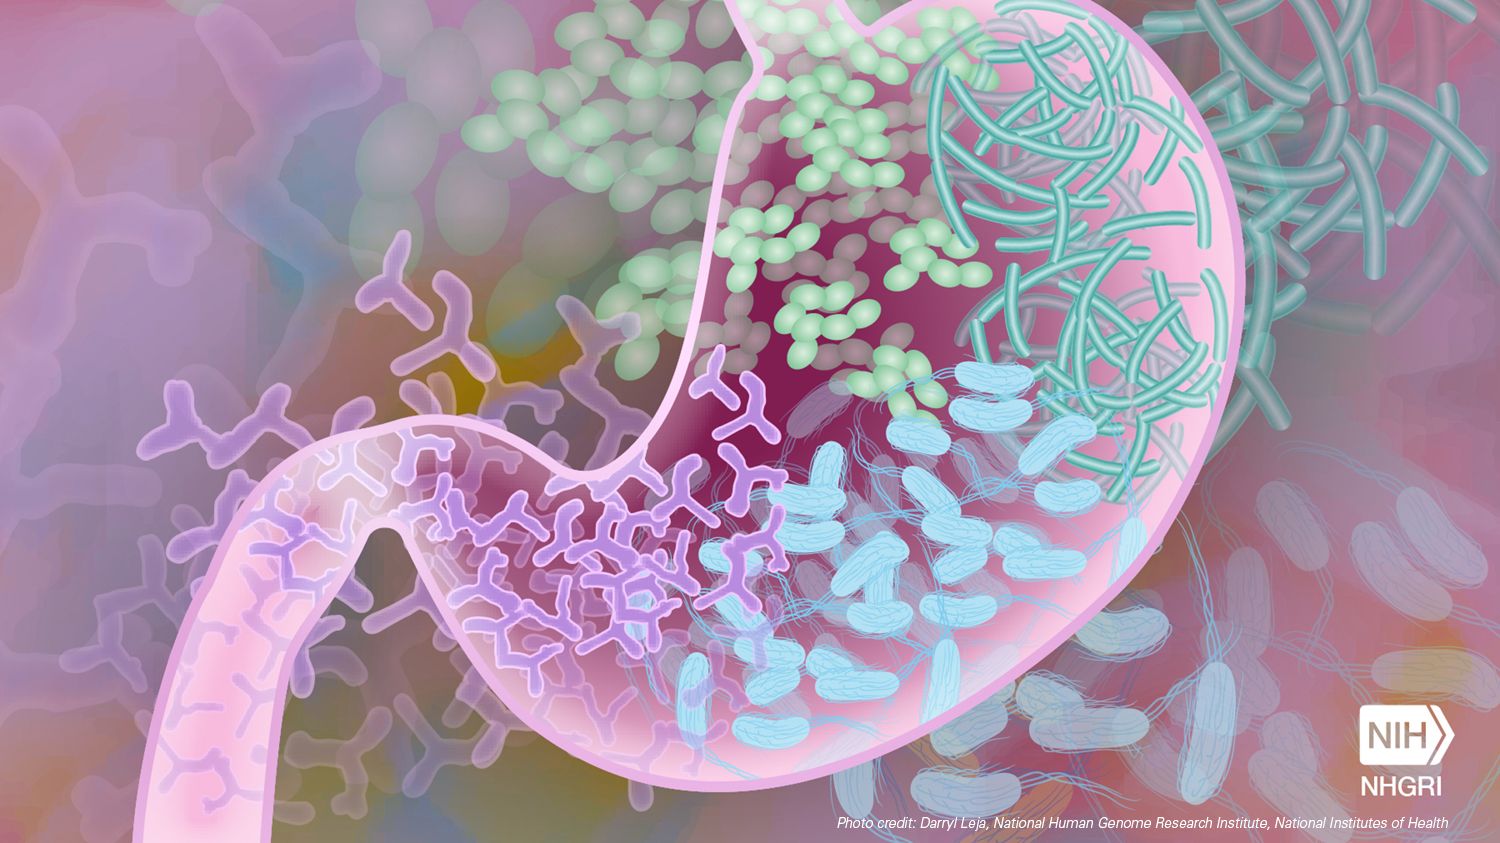 graphic of microbes in the stomach, image by Darryl Leja, National Human Genome Research Institute, National Institutes of Health